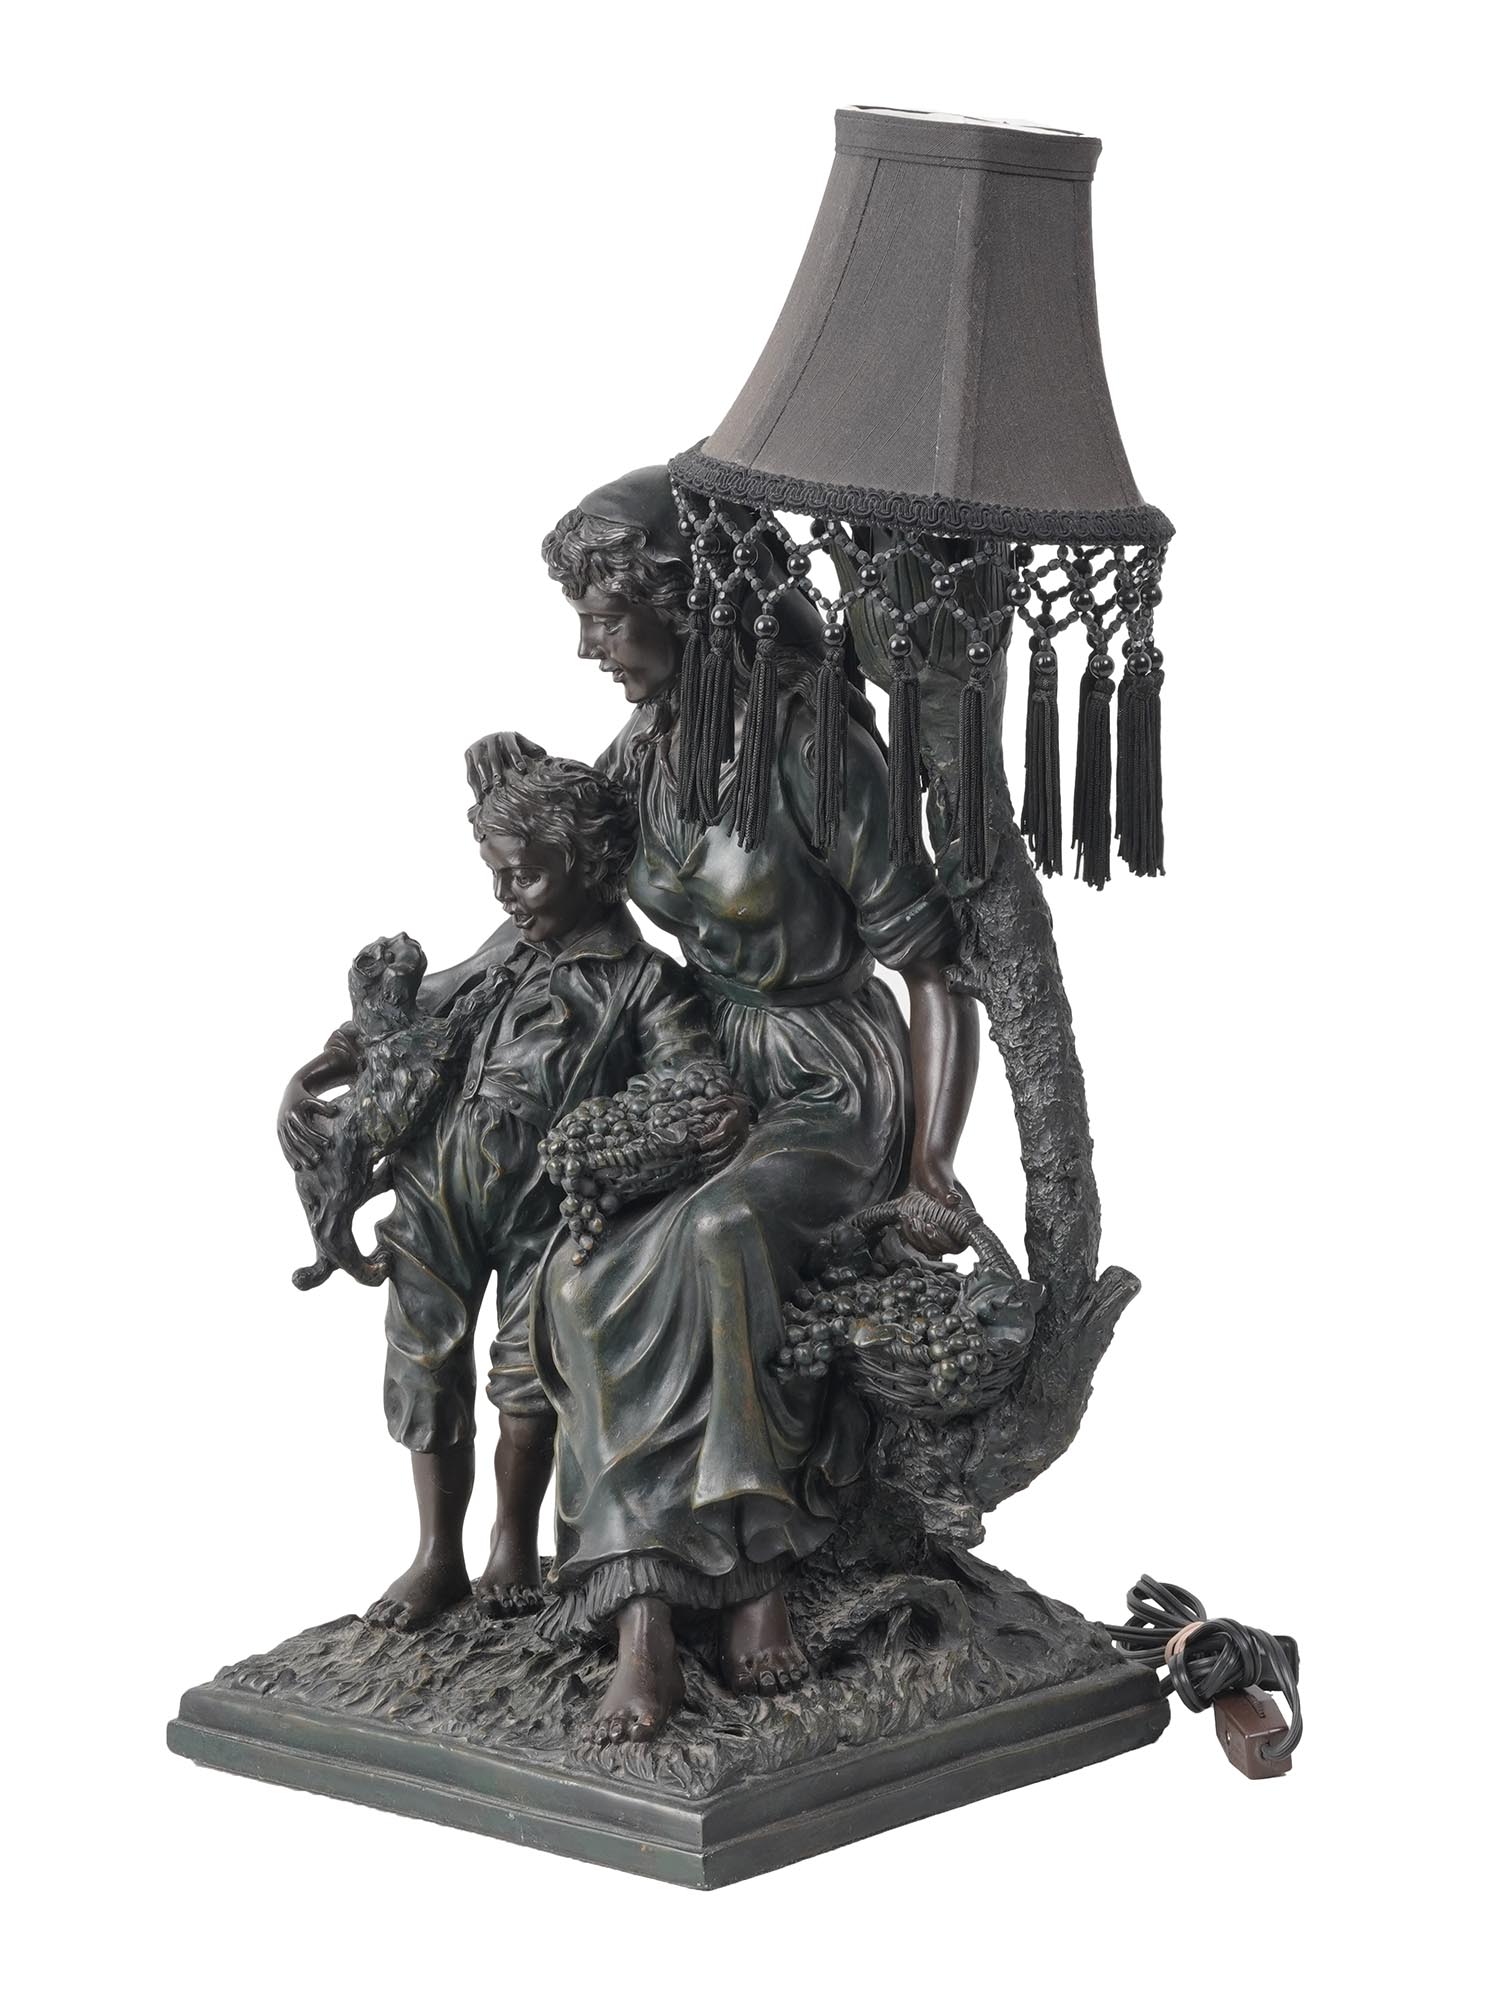 BLACK SCULPTURAL TABLE LAMP MOTHER WITH CHILD PIC-0